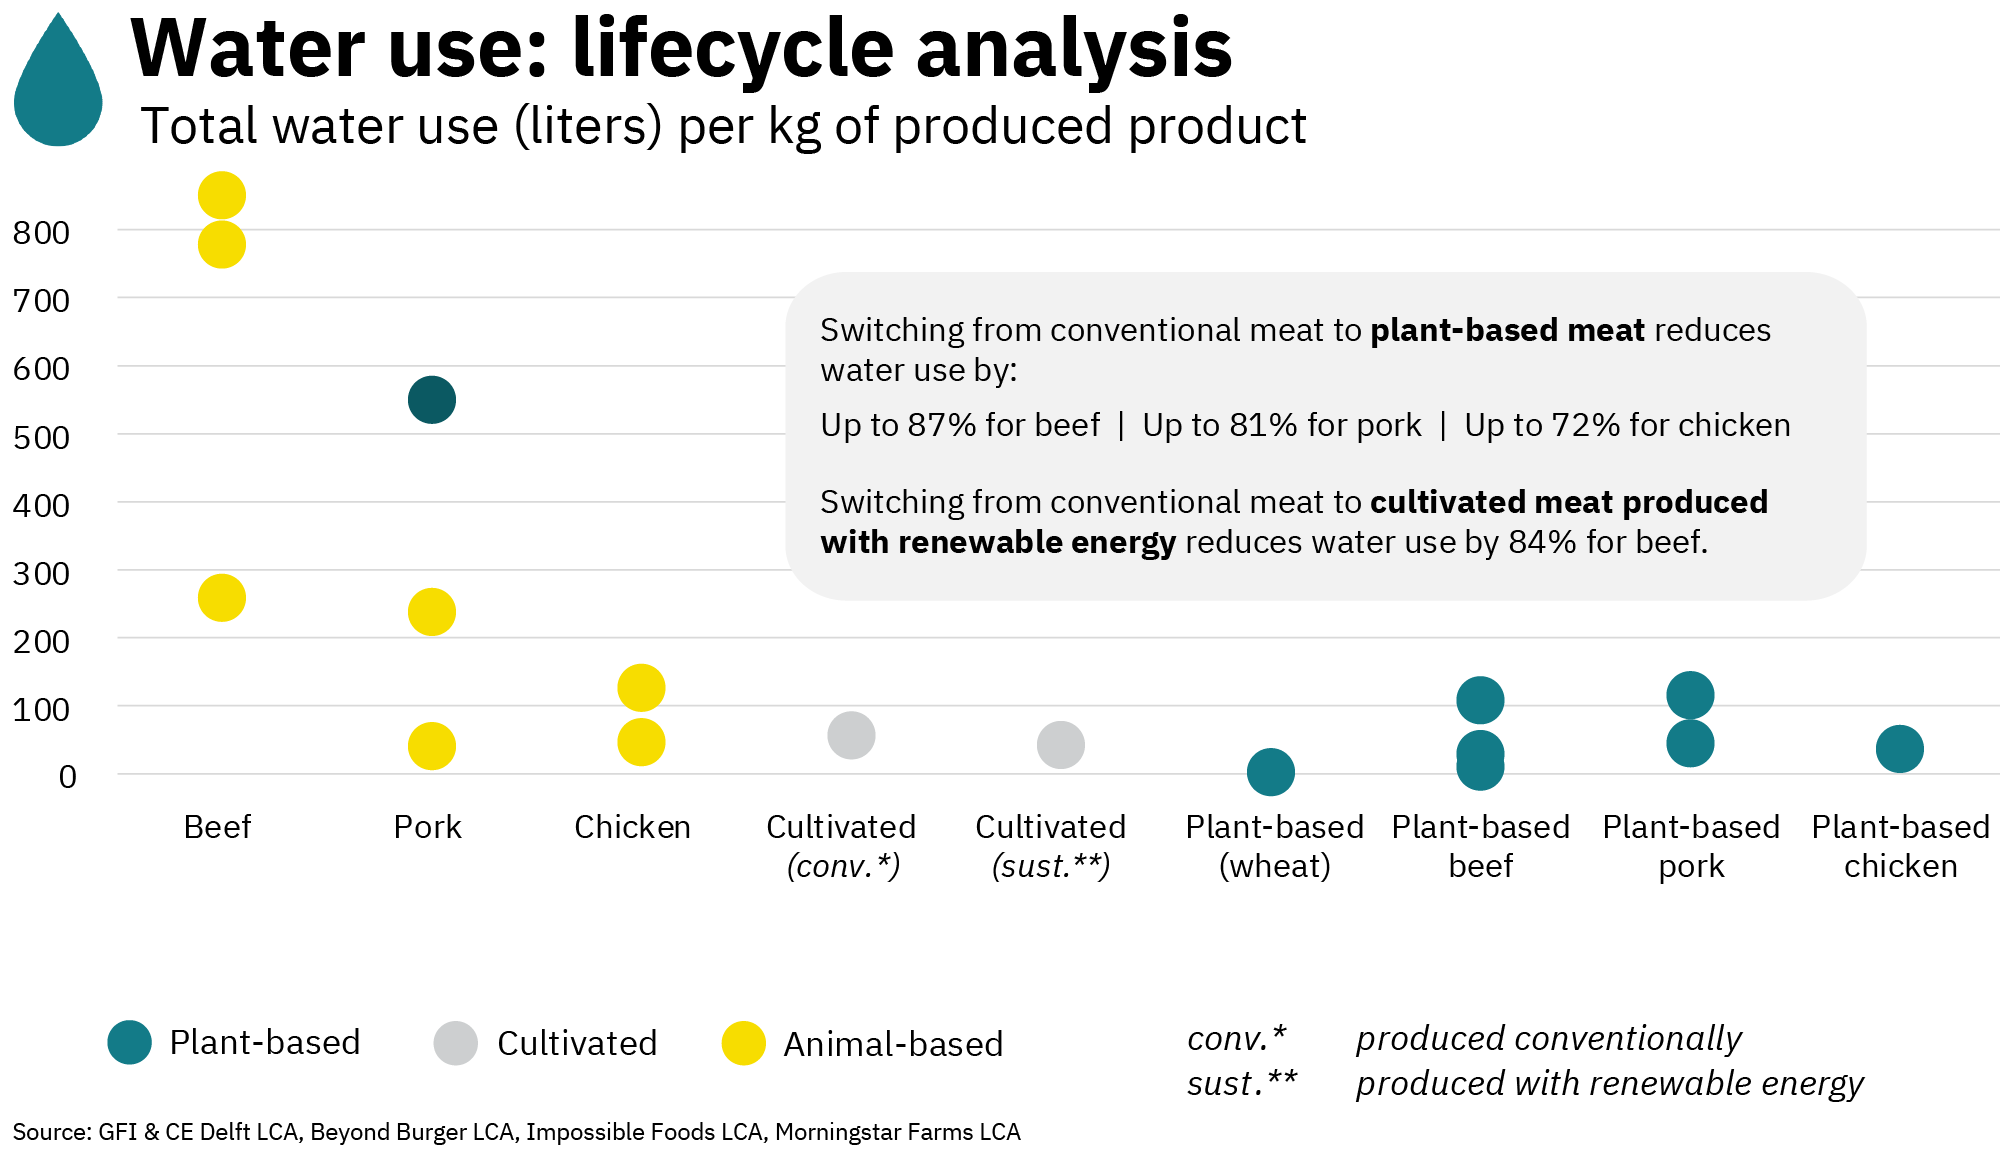 A chart displaying life cycle analysis data on total water use (liters) per kg of produced product. Switching to plant-based meat reduces water use by up to 72% for chicken, 87% for beef, and 81% for pork. Switching to cultivated meat produced with renewable energy reduces water use by 84% for beef.